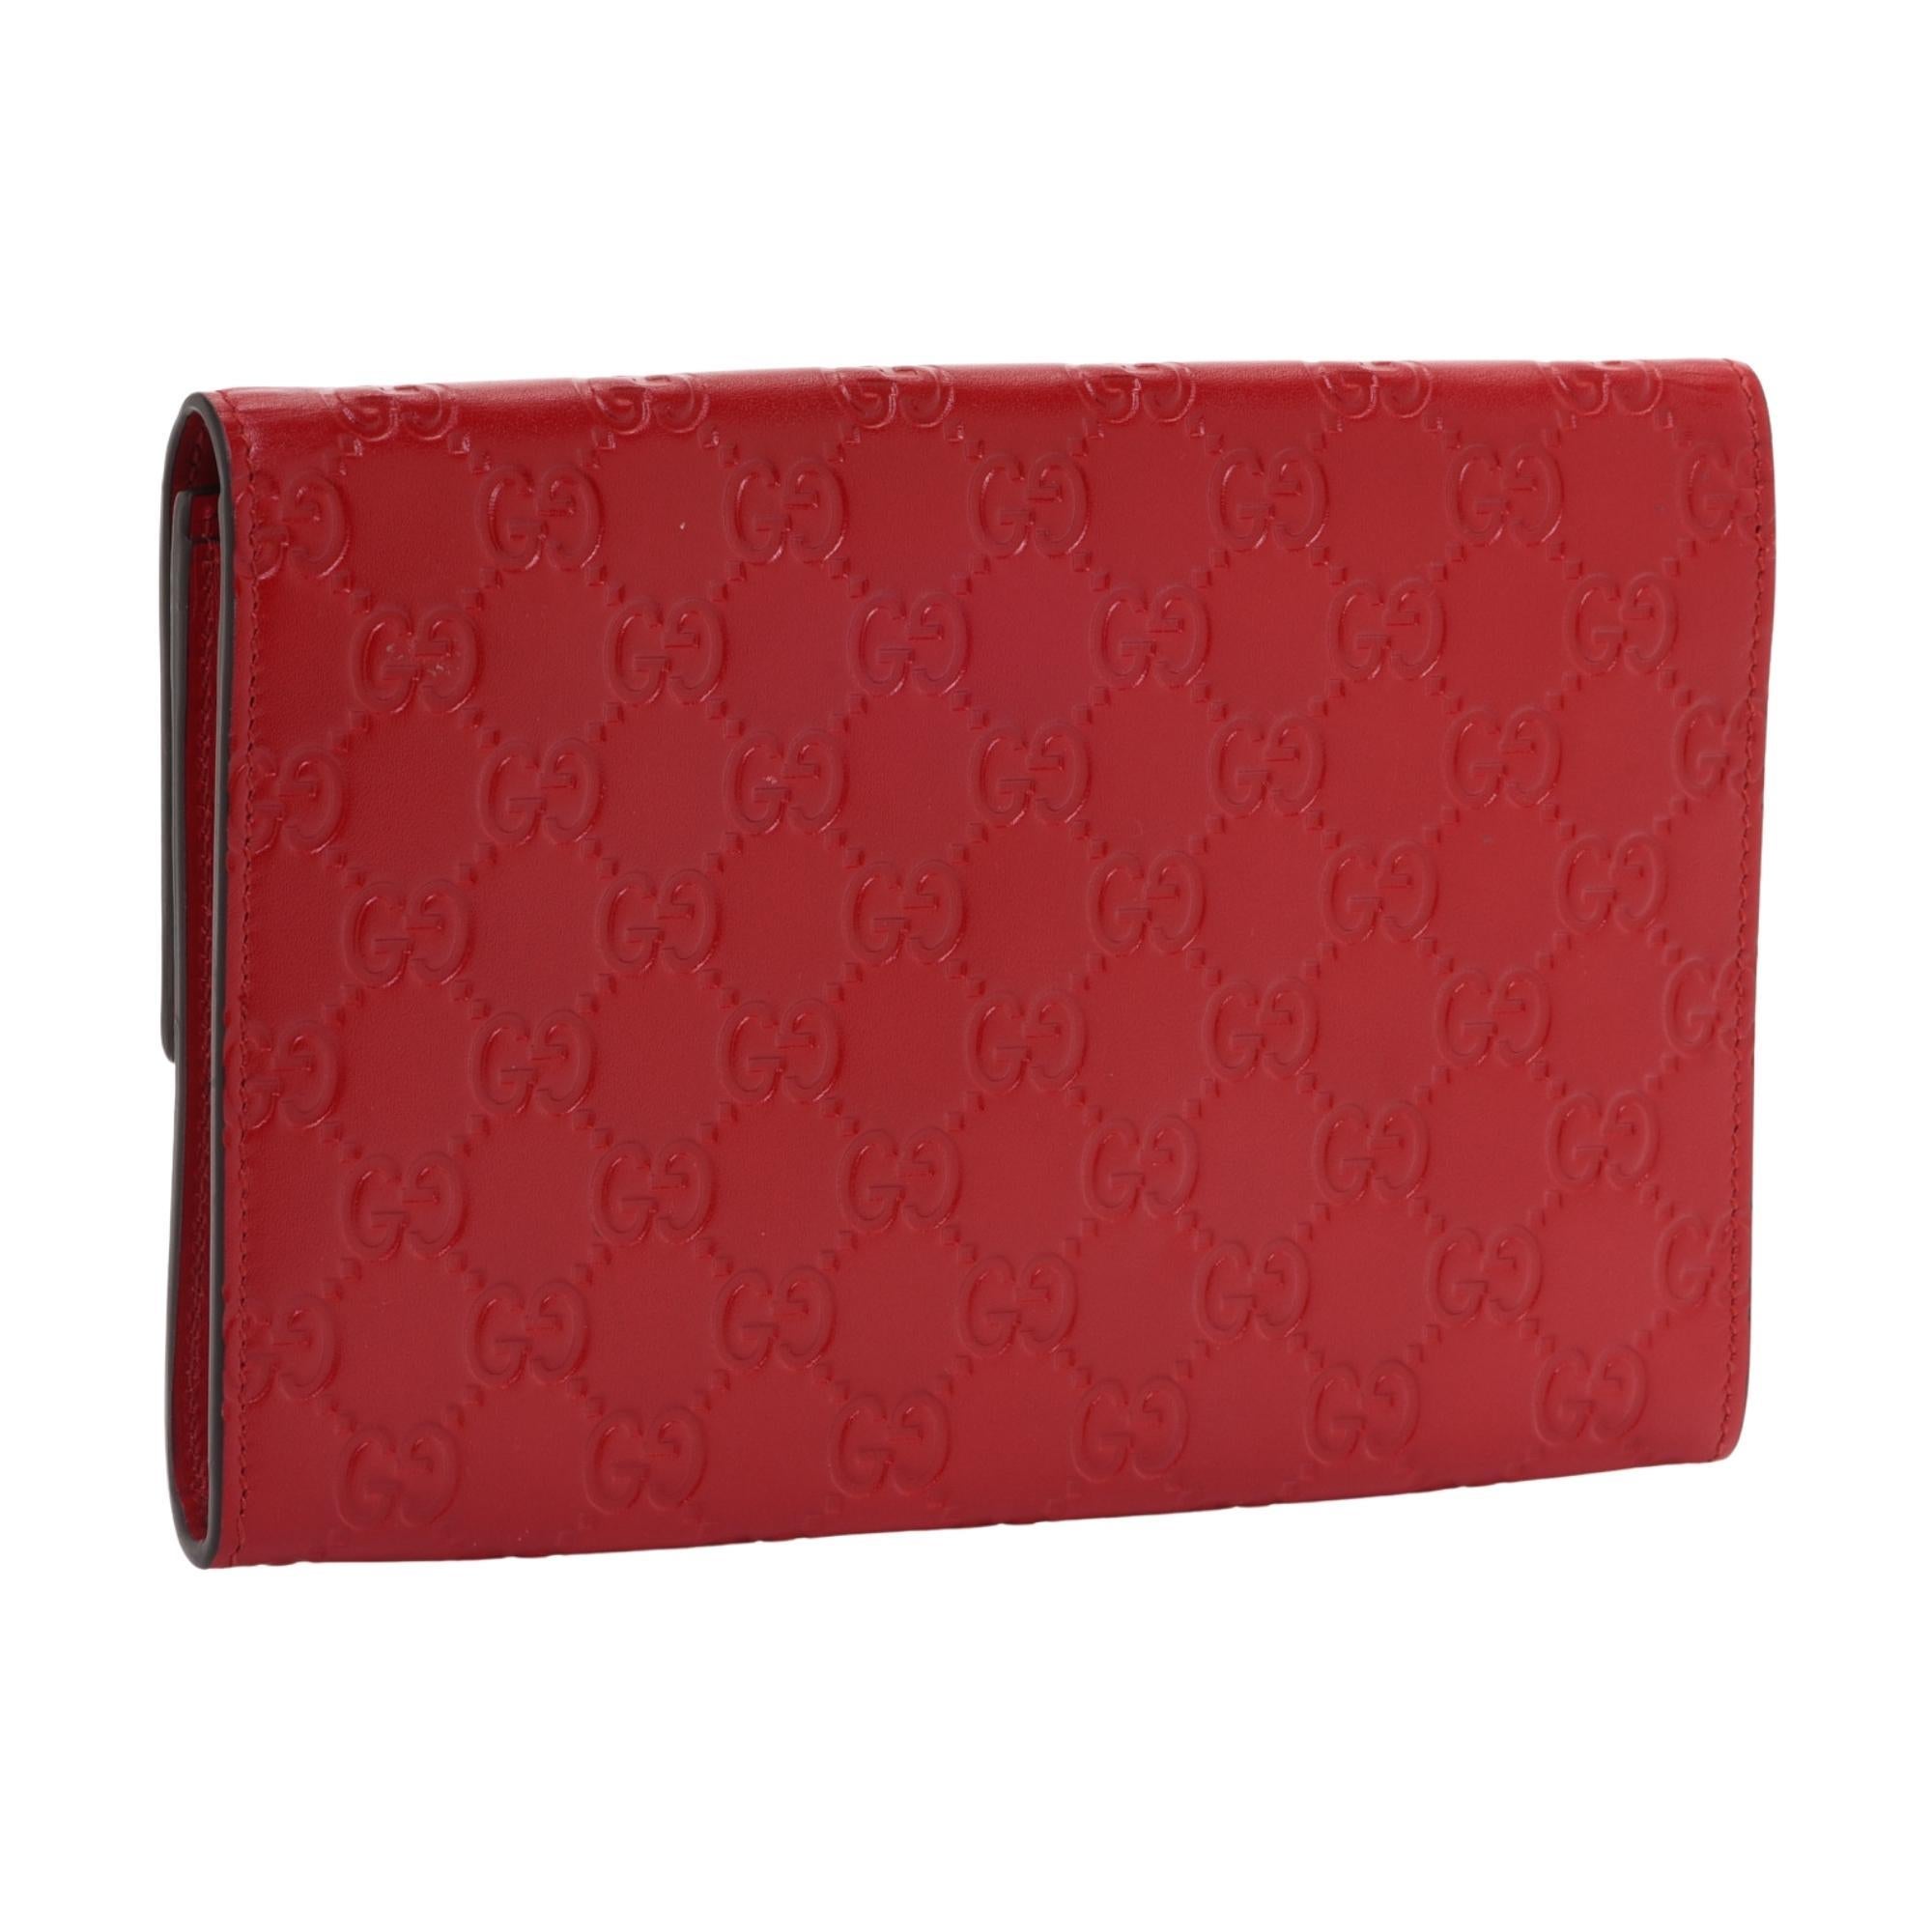 This clutch is made of Guccissima GG monogram embossed leather in red. The front padlock flap opens to a matching interior with card slots and a zip pocket.

COLOR: Red
MATERIAL: Leather
ITEM CODE: 453156
MEASURES: H 5.25” x L 8.25” x D 1”
COMES